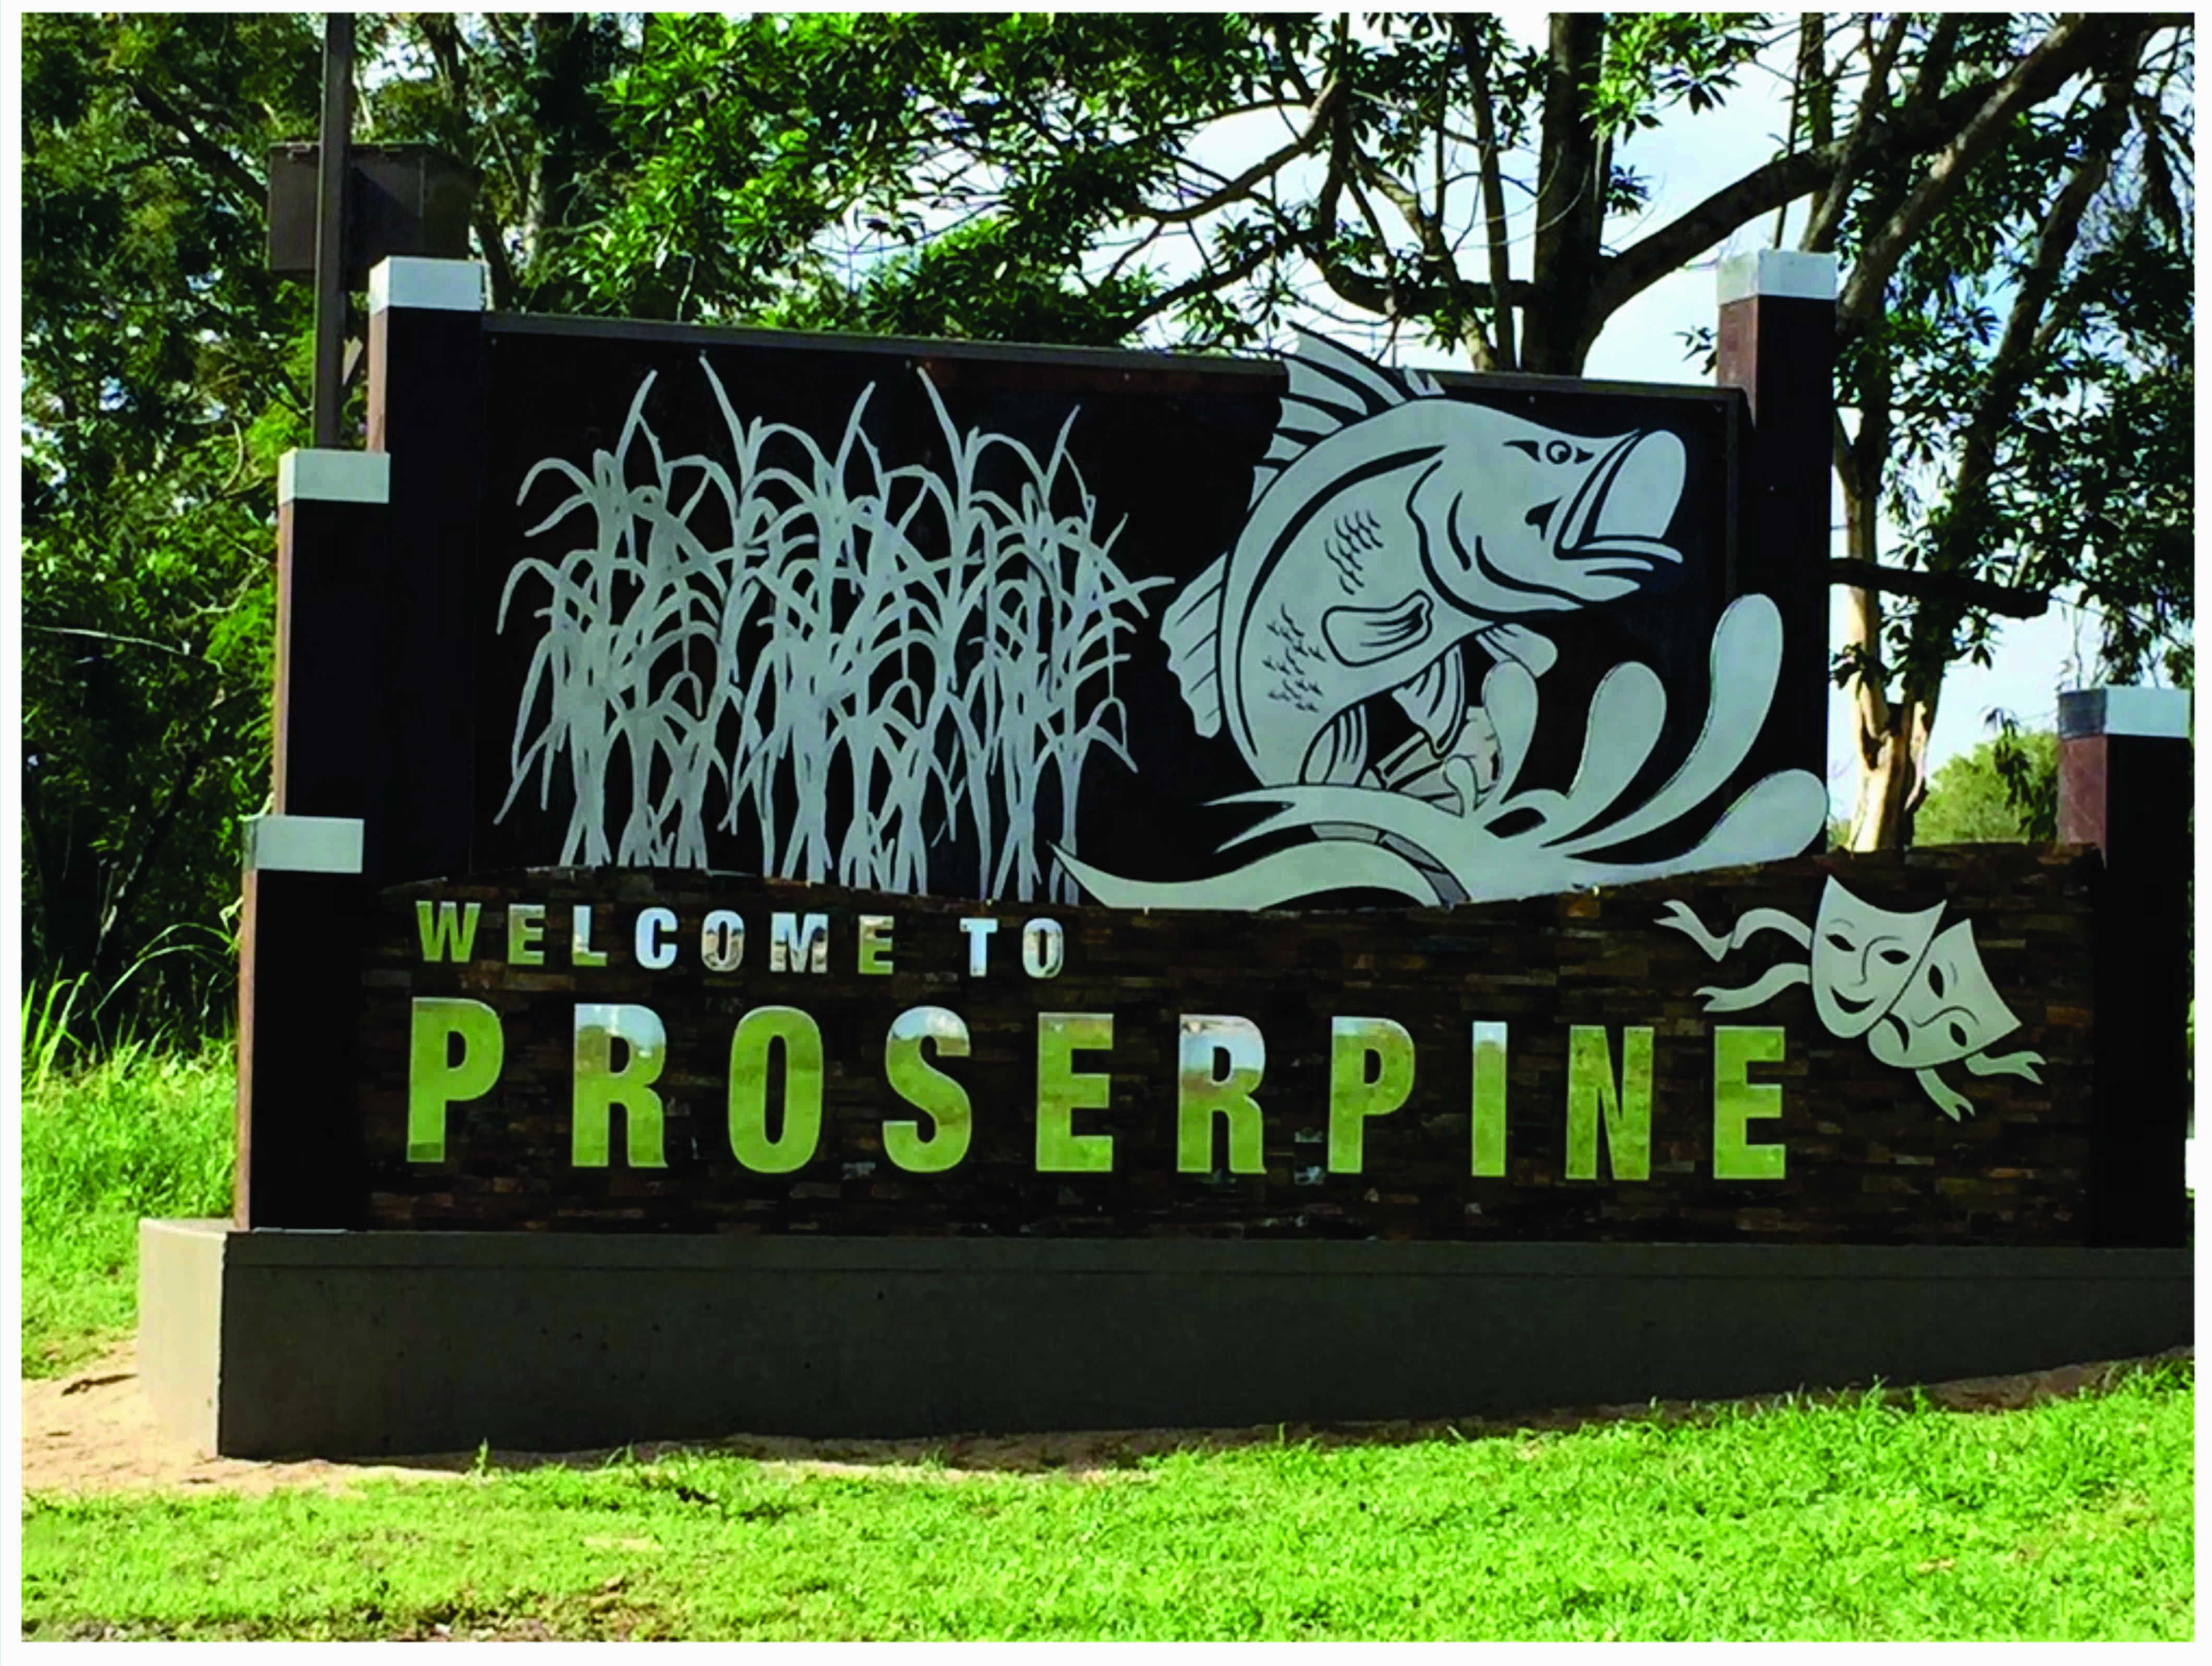 Welcome to proserpine - Tropical Designs